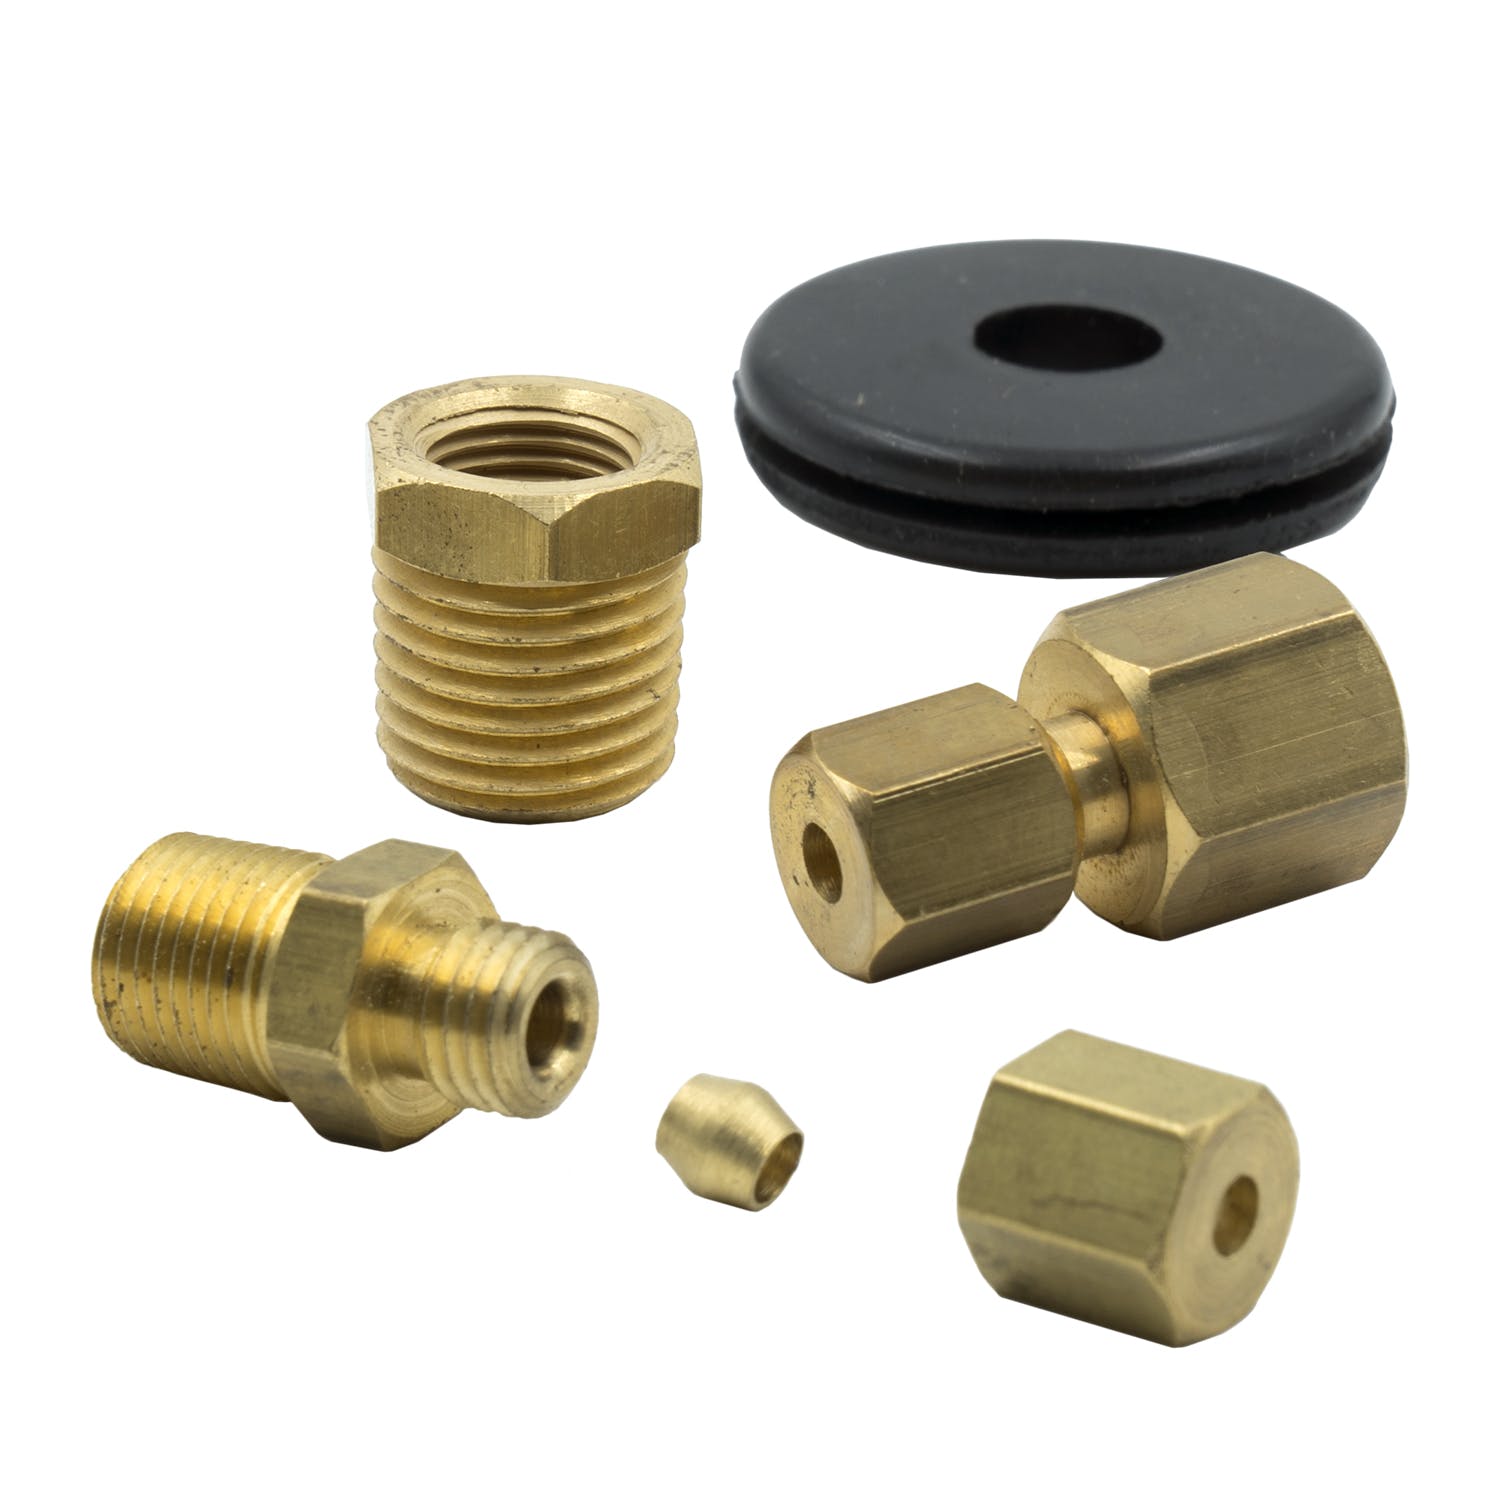 AutoMeter Products 3290 1/8in. NPT COMPRESSION FITTING KIT